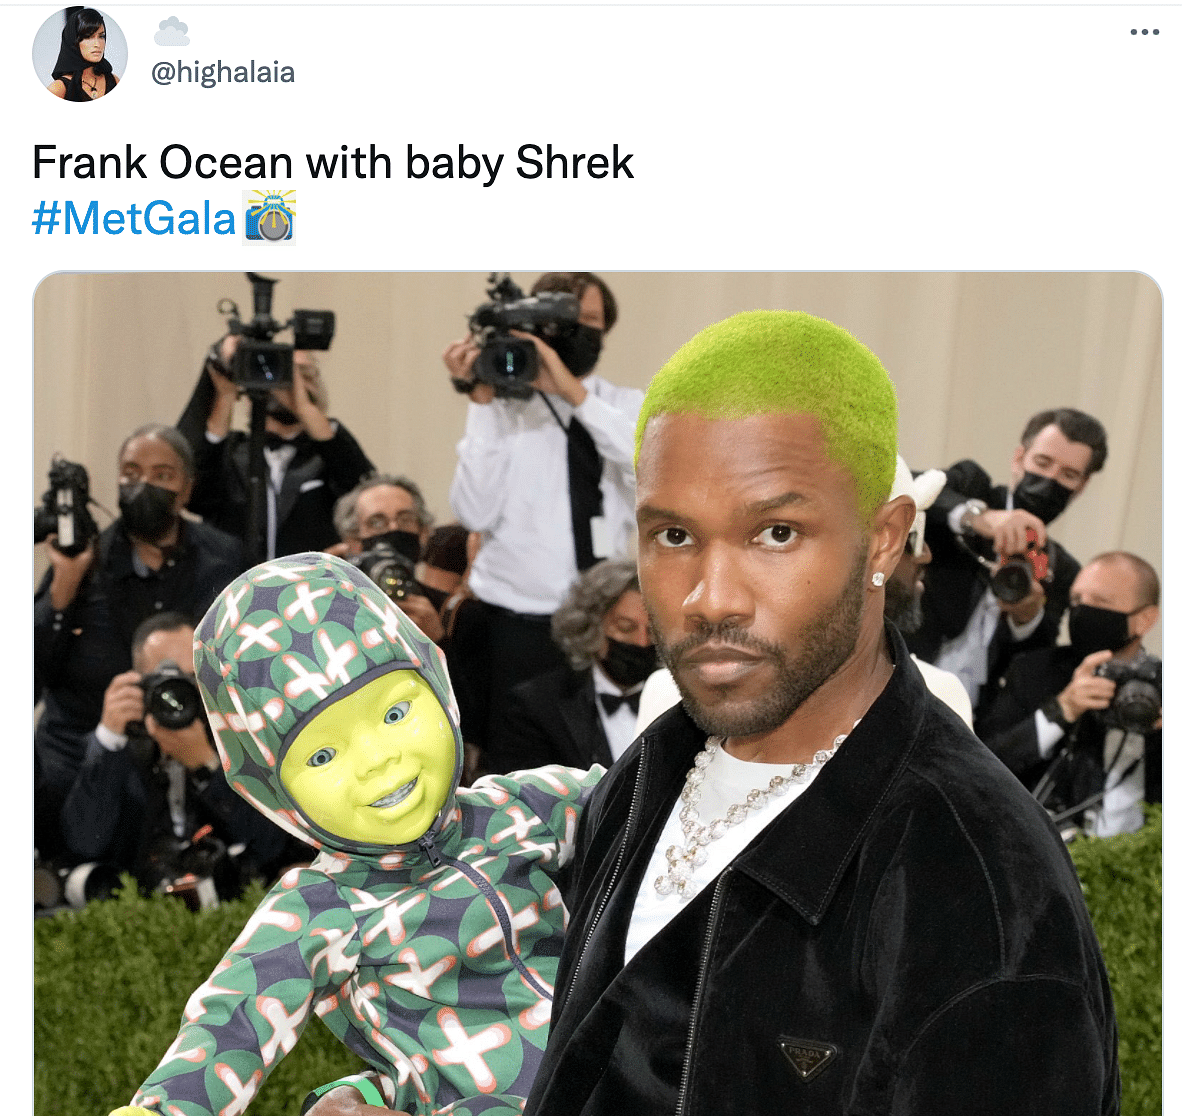 Right from Kim Kardashian to Rihanna, the Met Gala memes are better than the outfits!